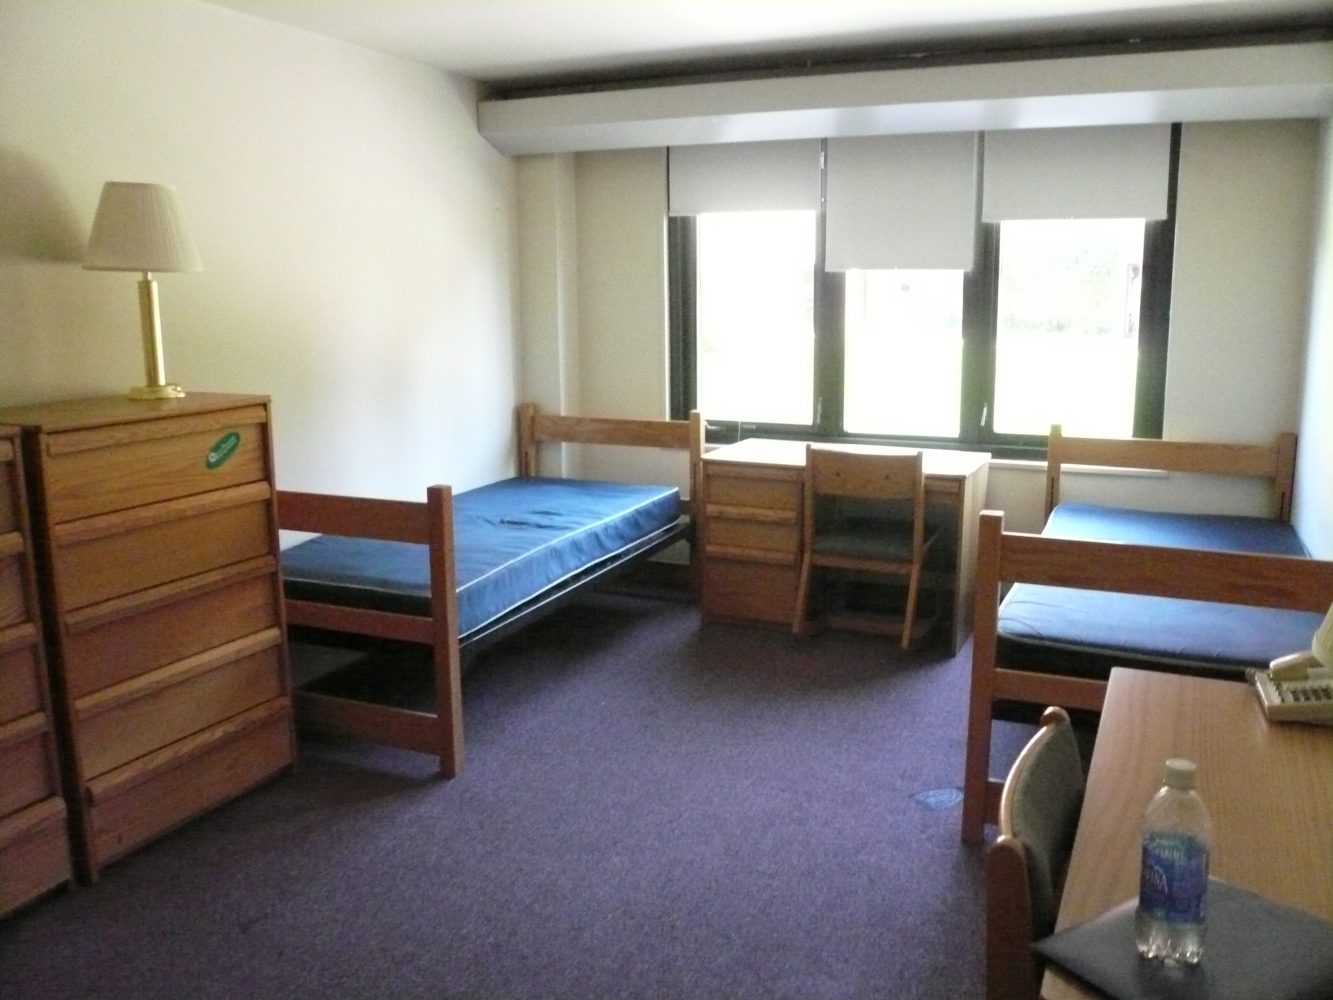 Dorms are better than commuting – Calvin University Chimes